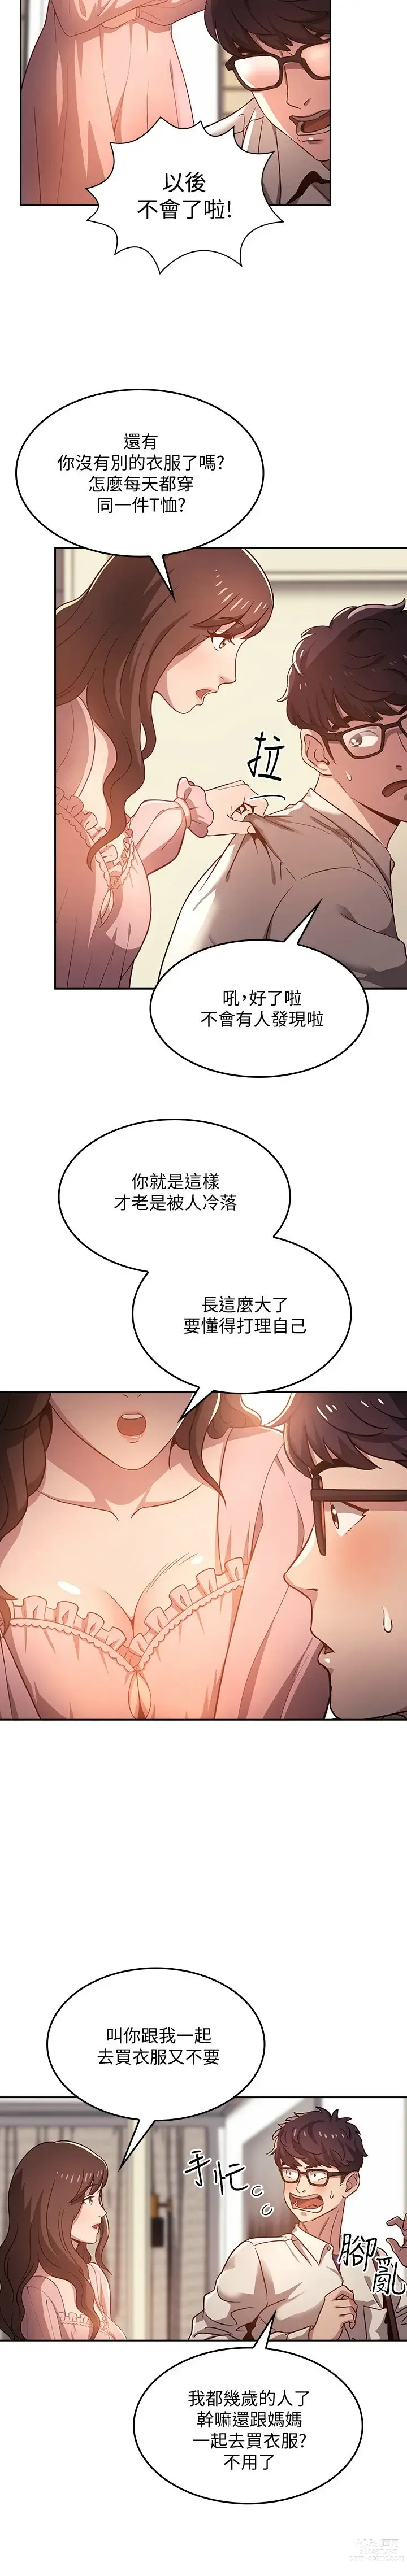 Page 3 of manga 朋友的妈妈/Mother Hunting